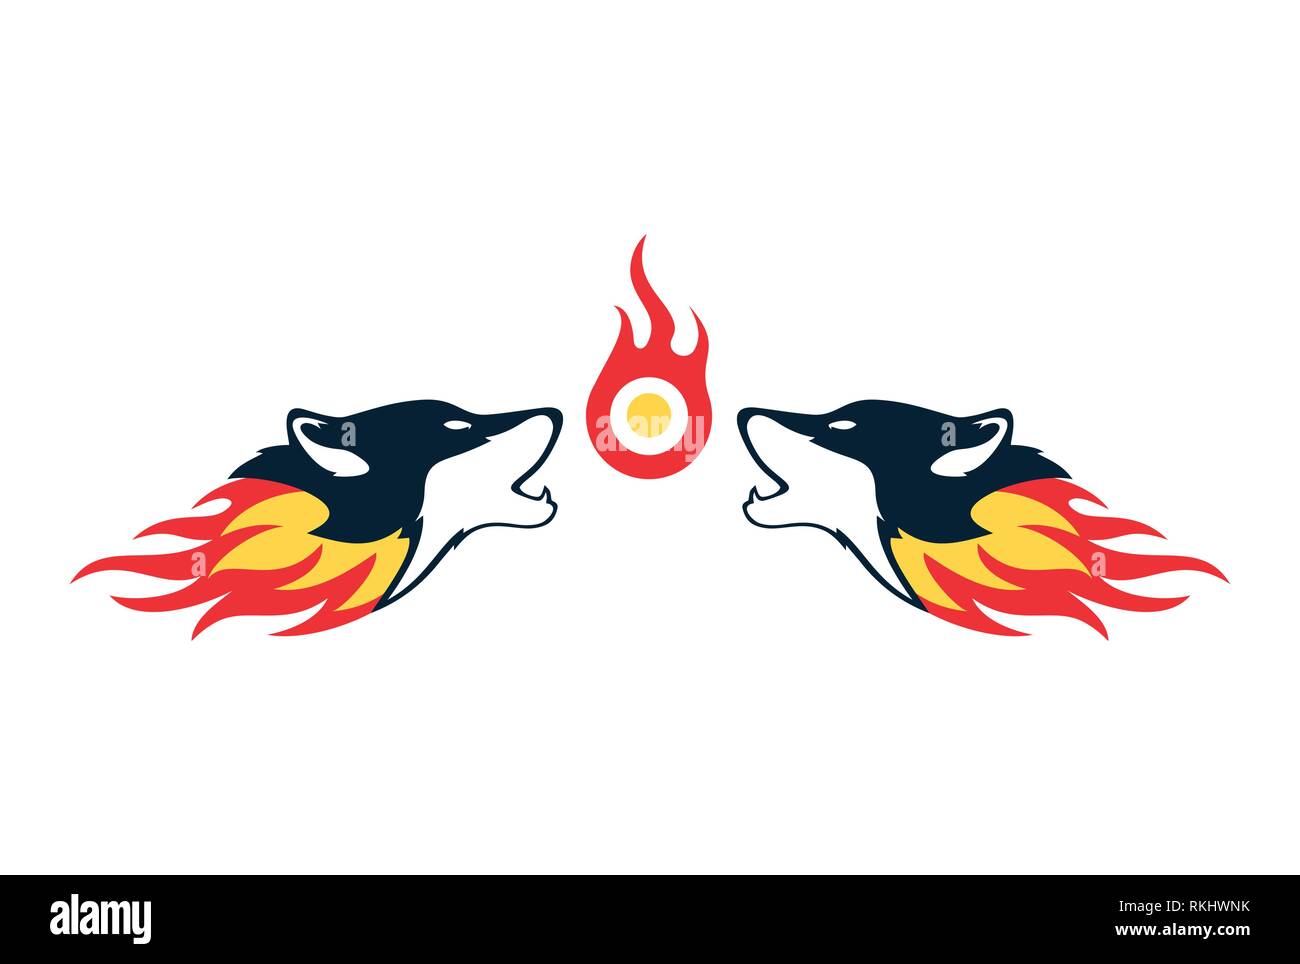 two fire wolf logo concept icon Stock Vector